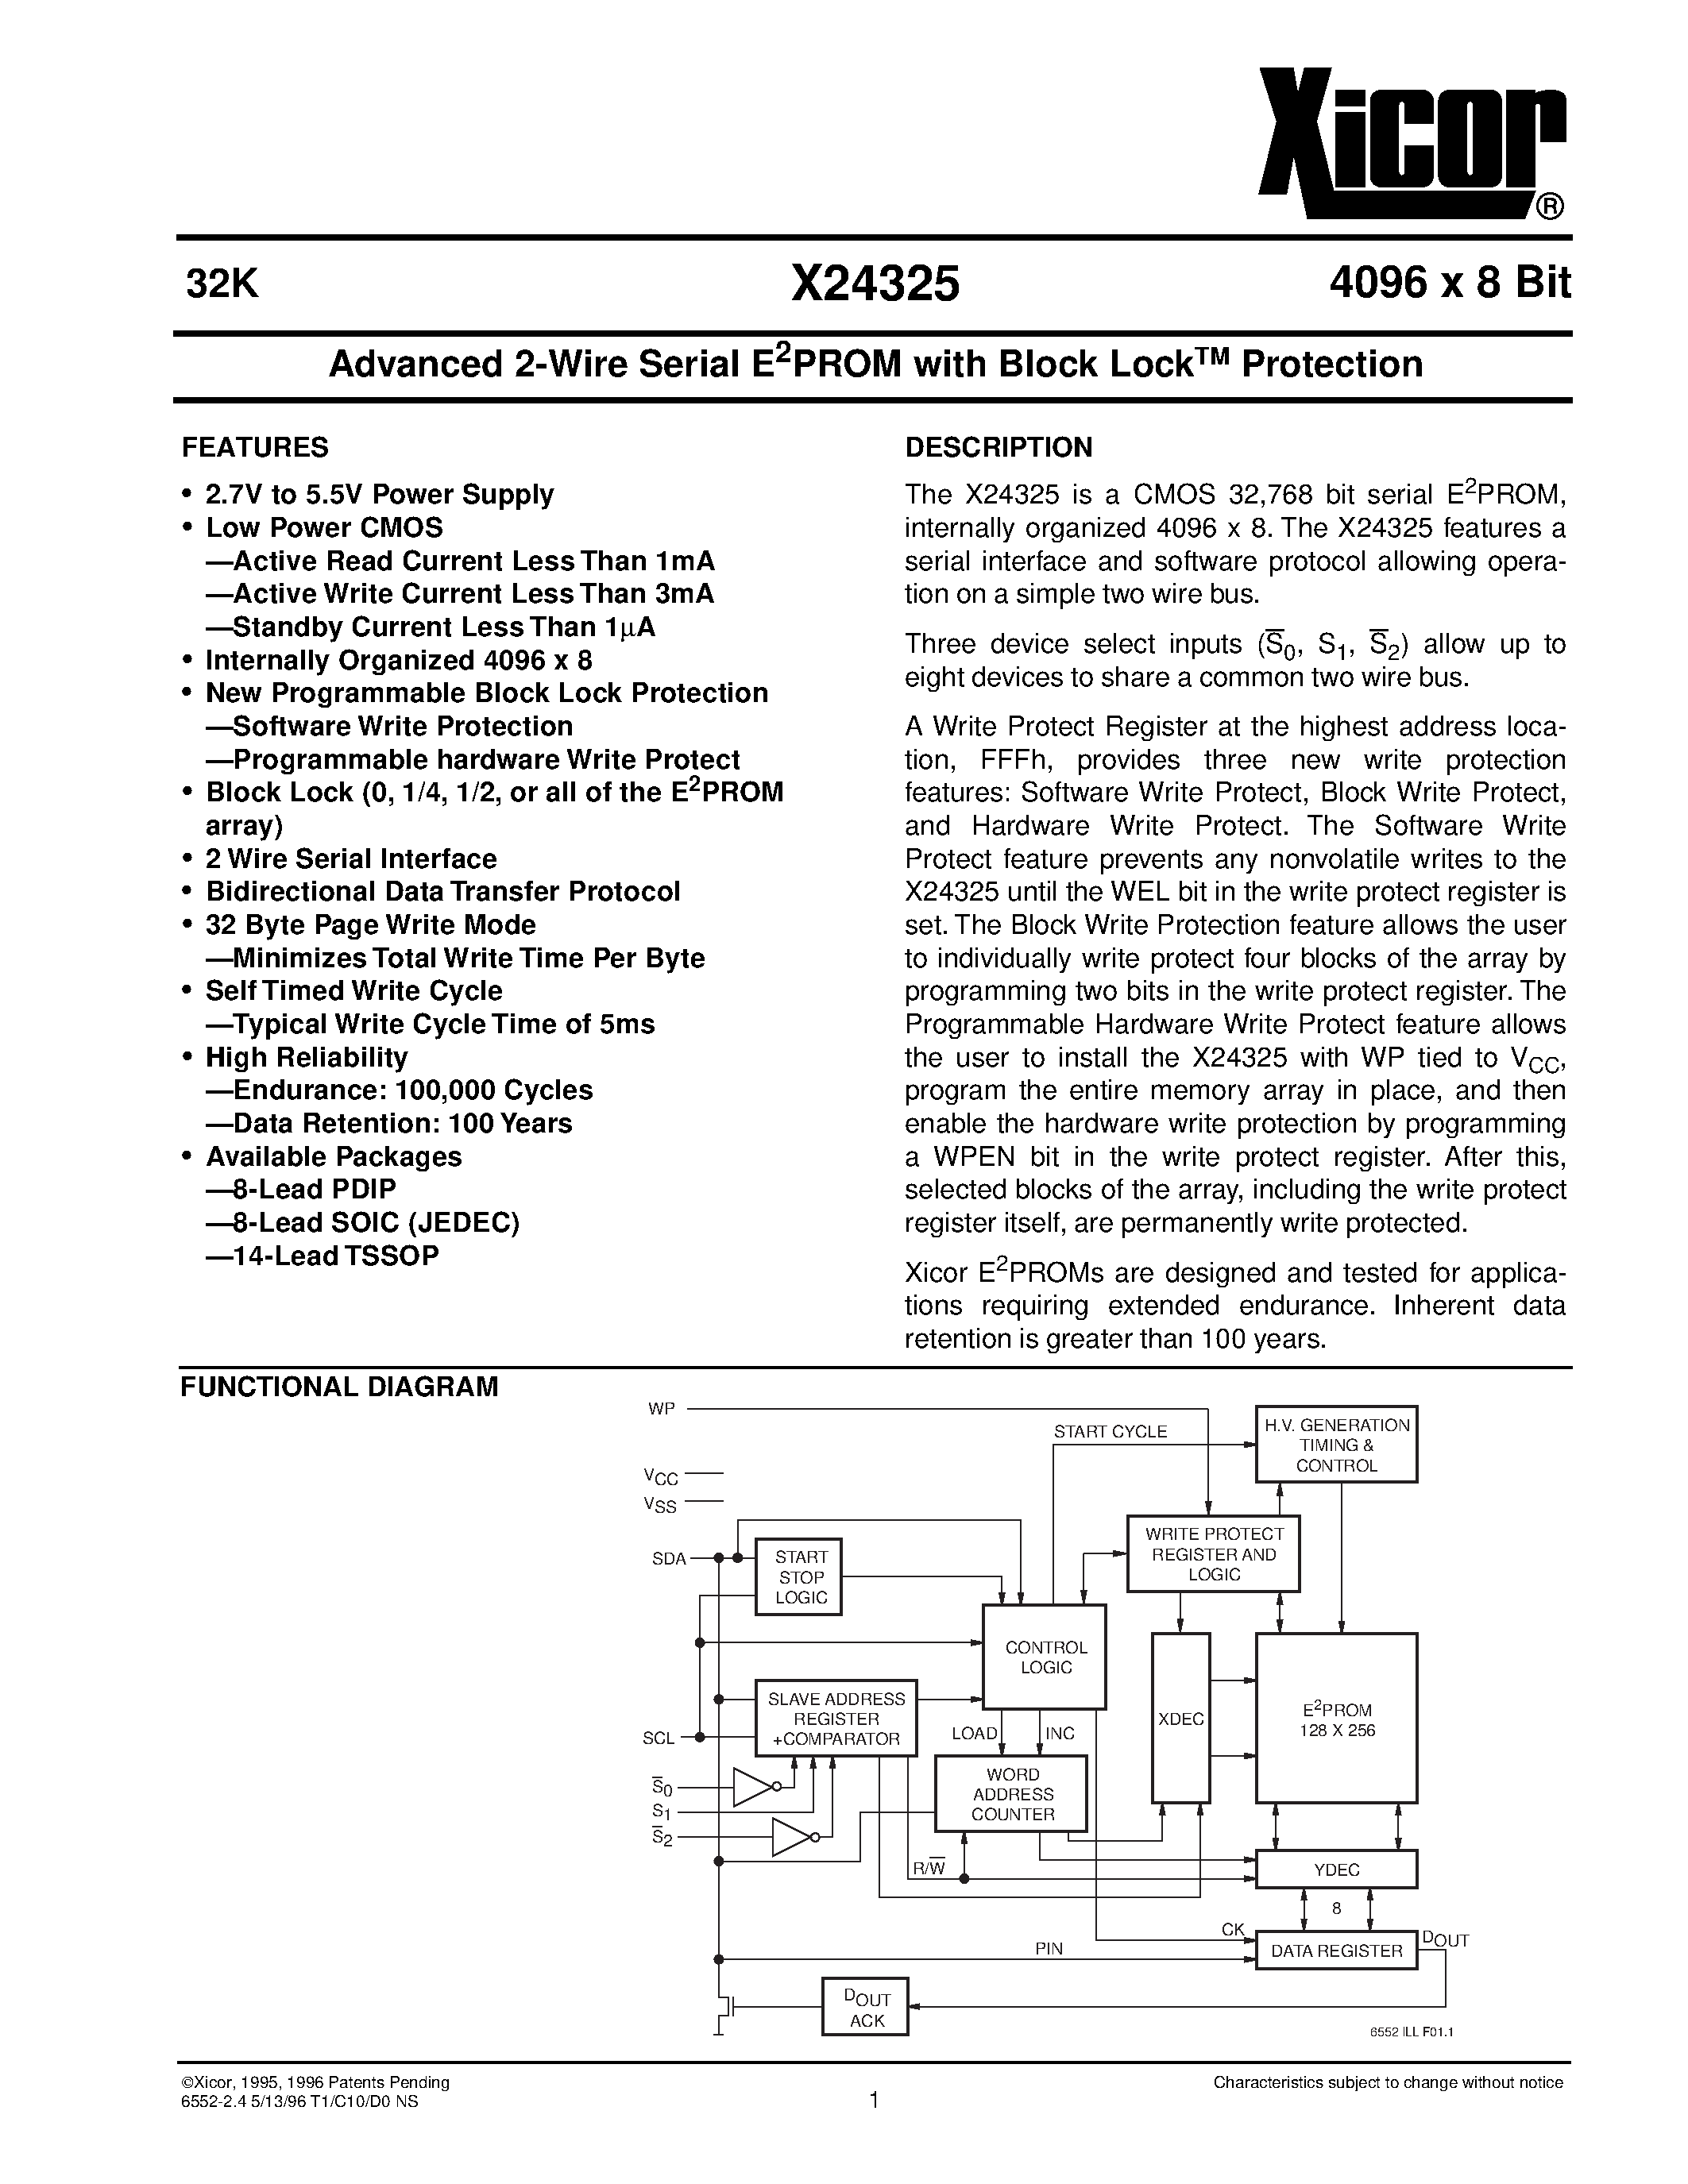 Datasheet X24325VM-2.7 - Advanced 2-Wire Serial E 2 PROM with Block Lock TM Protection page 1